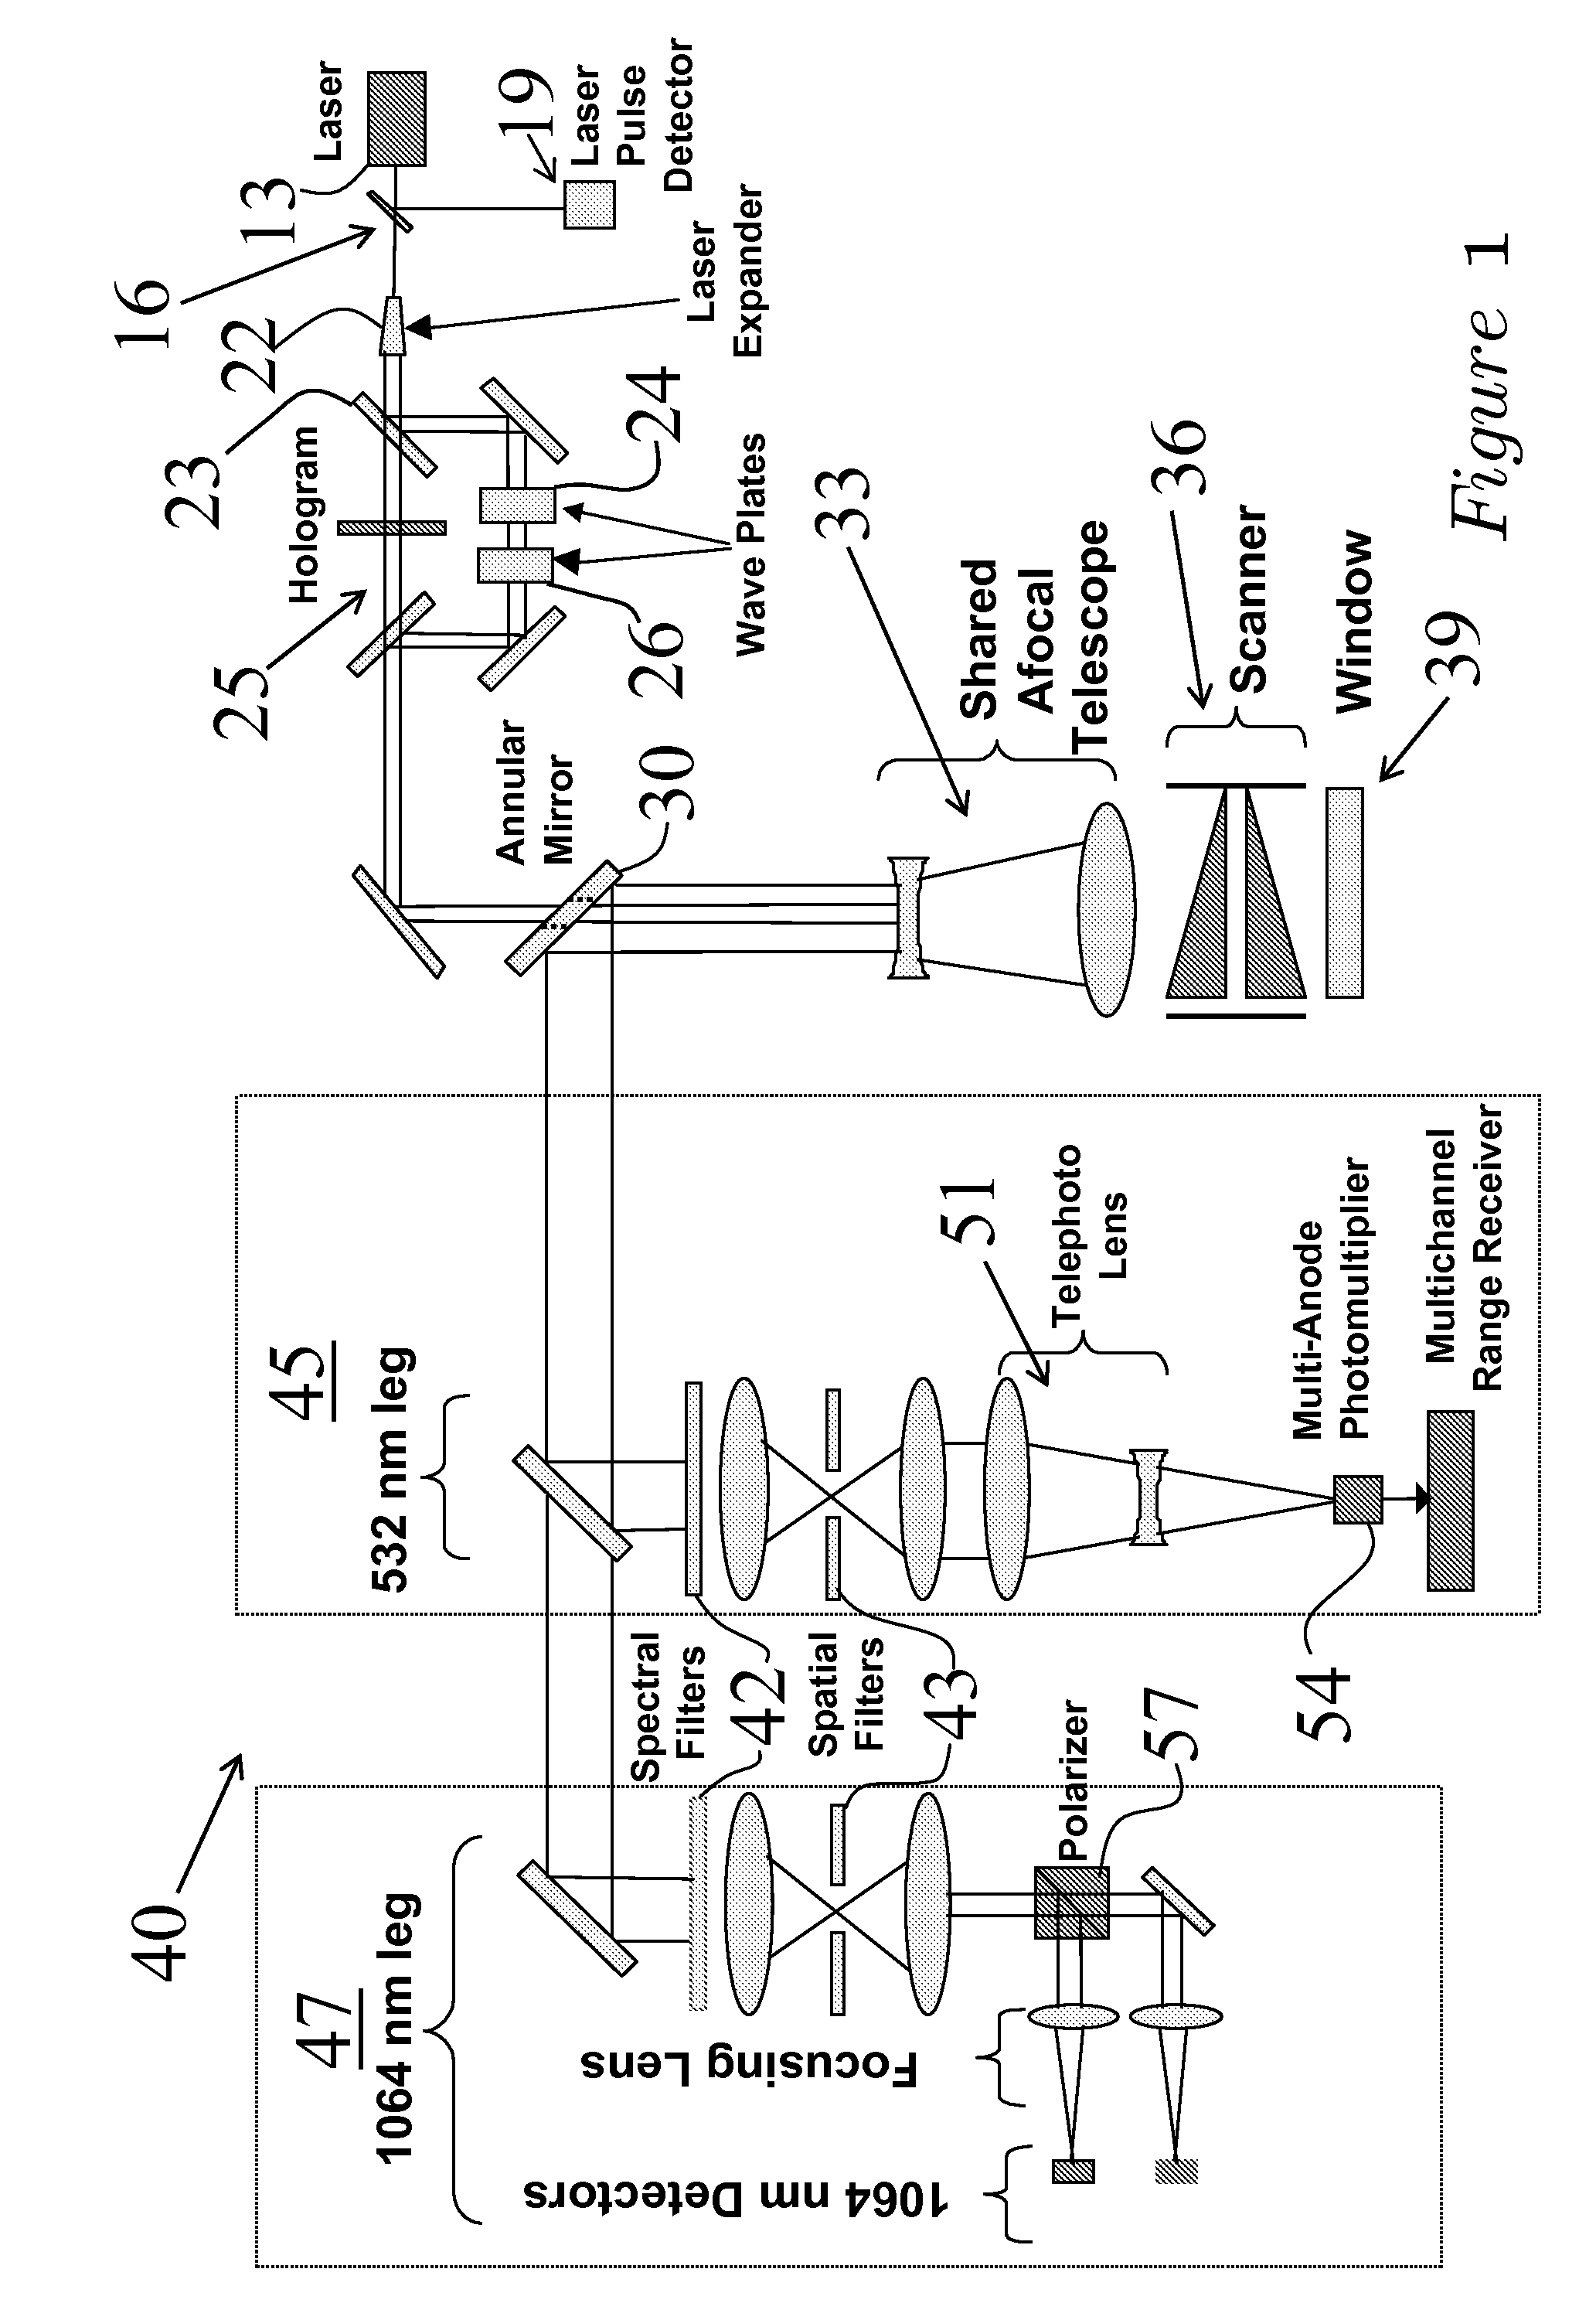 Scanner/optical system for three-dimensional lidar imaging and polarimetry